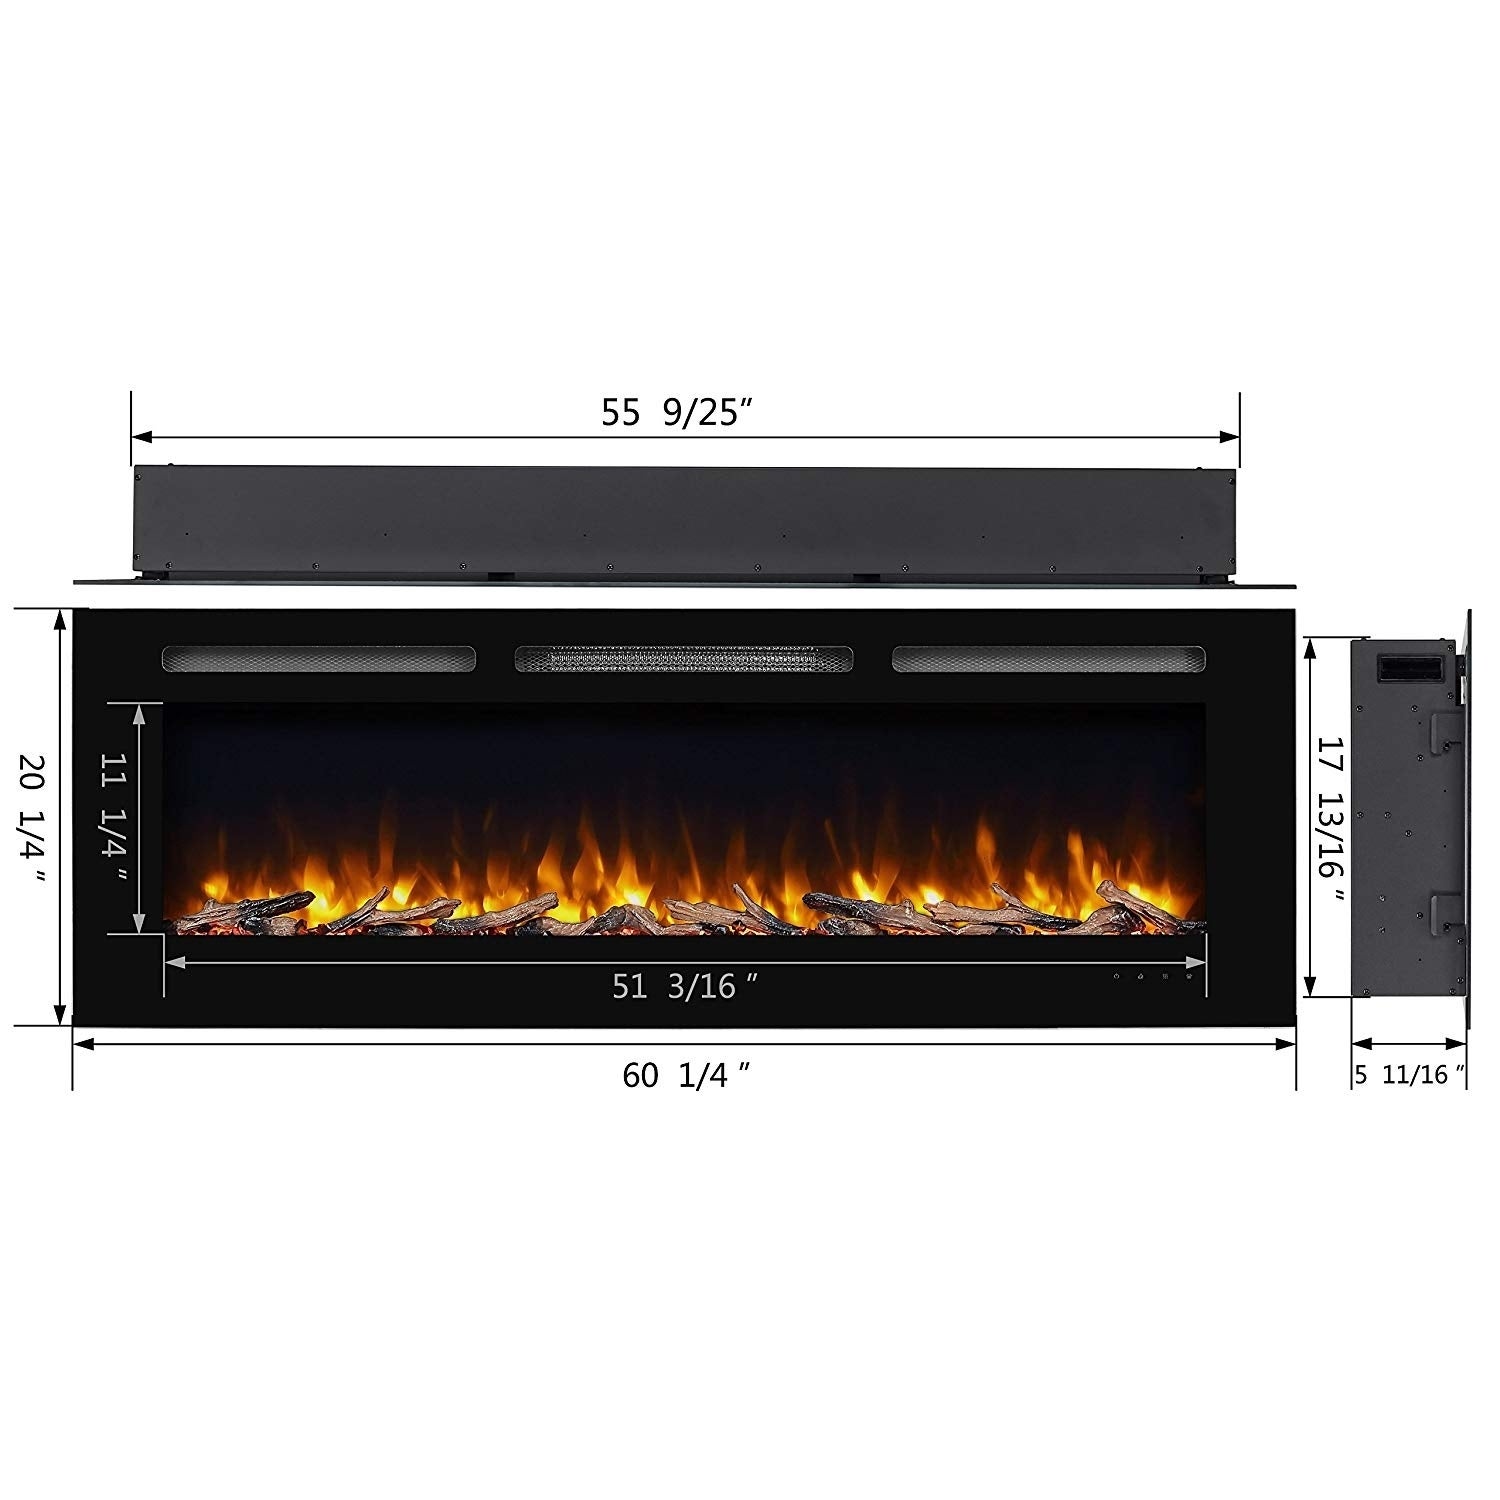 How to Make An Electric Fireplace Look Built In New 19 Awesome 50 Inch Recessed Electric Fireplace